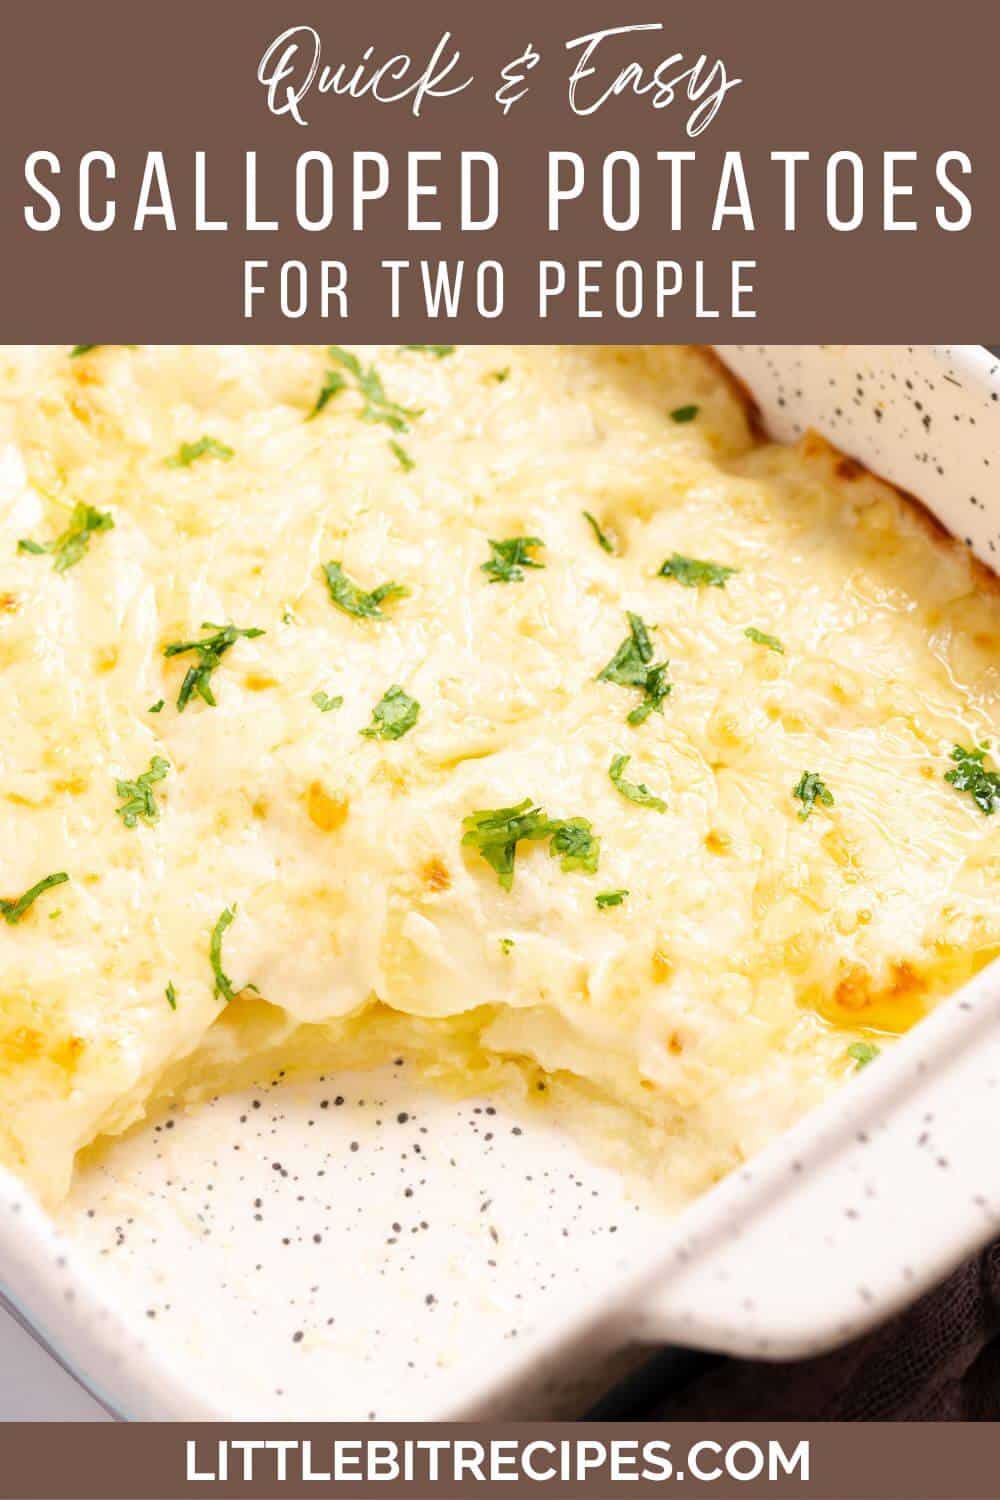 scalloped potatoes with text.